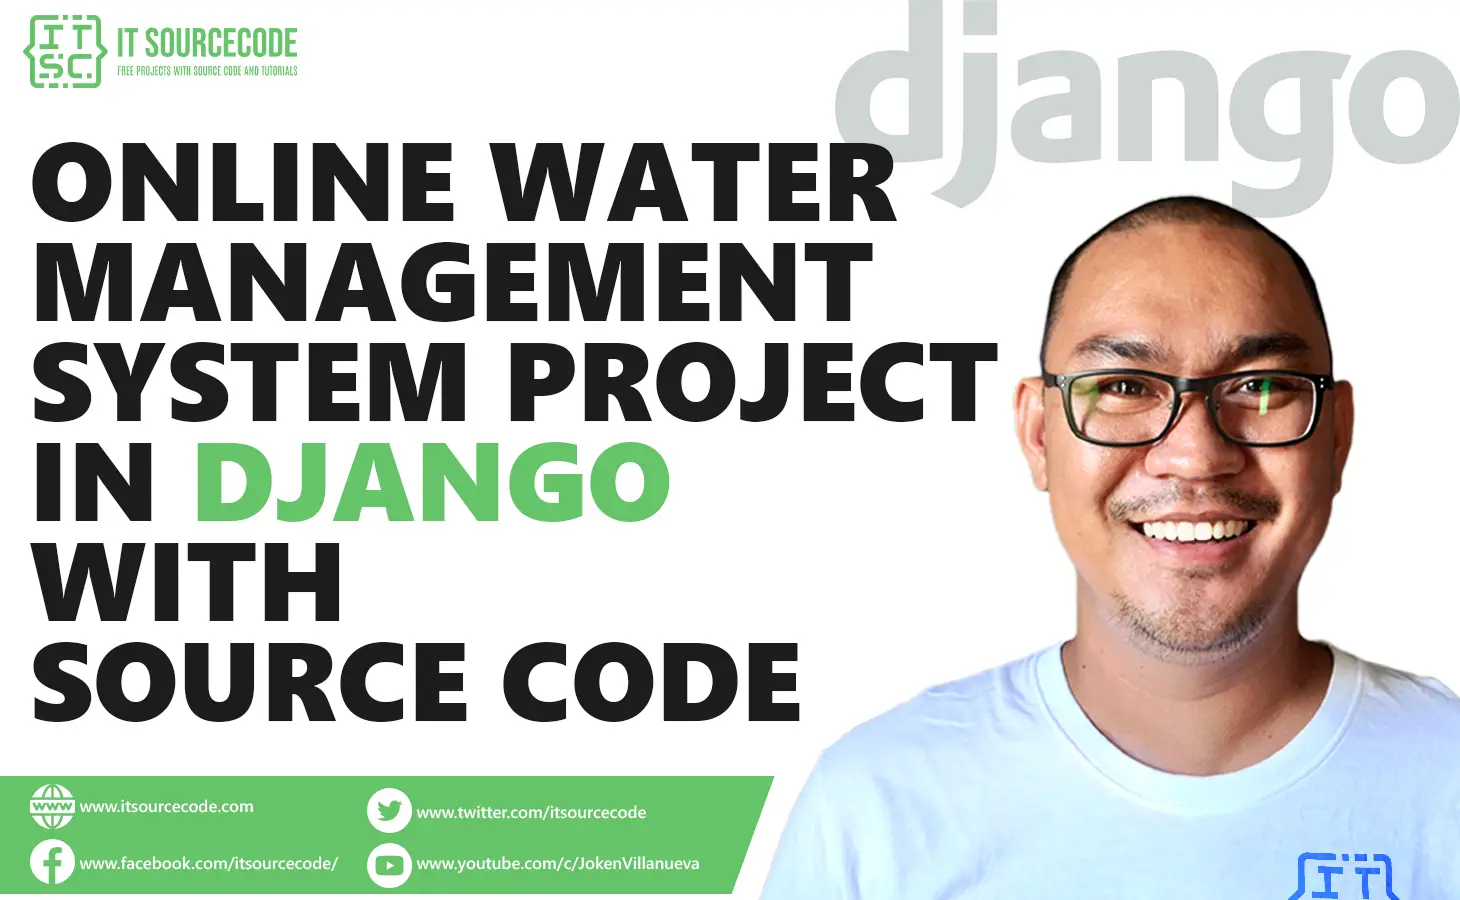 Online Water Management System Project in Django with Source Code